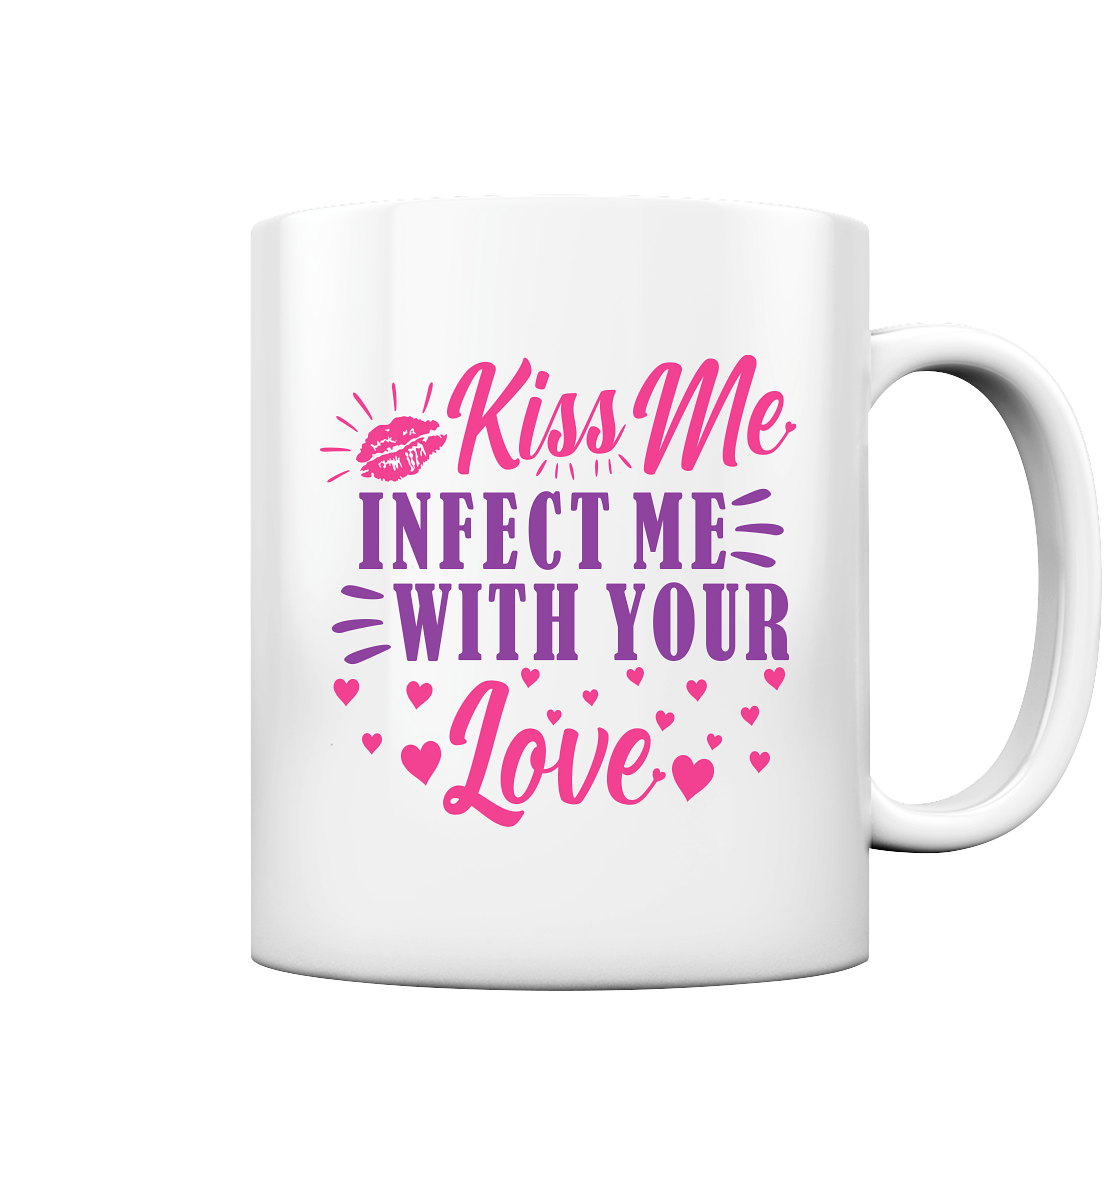 Kiss me infect me with your love - Tasse glossy